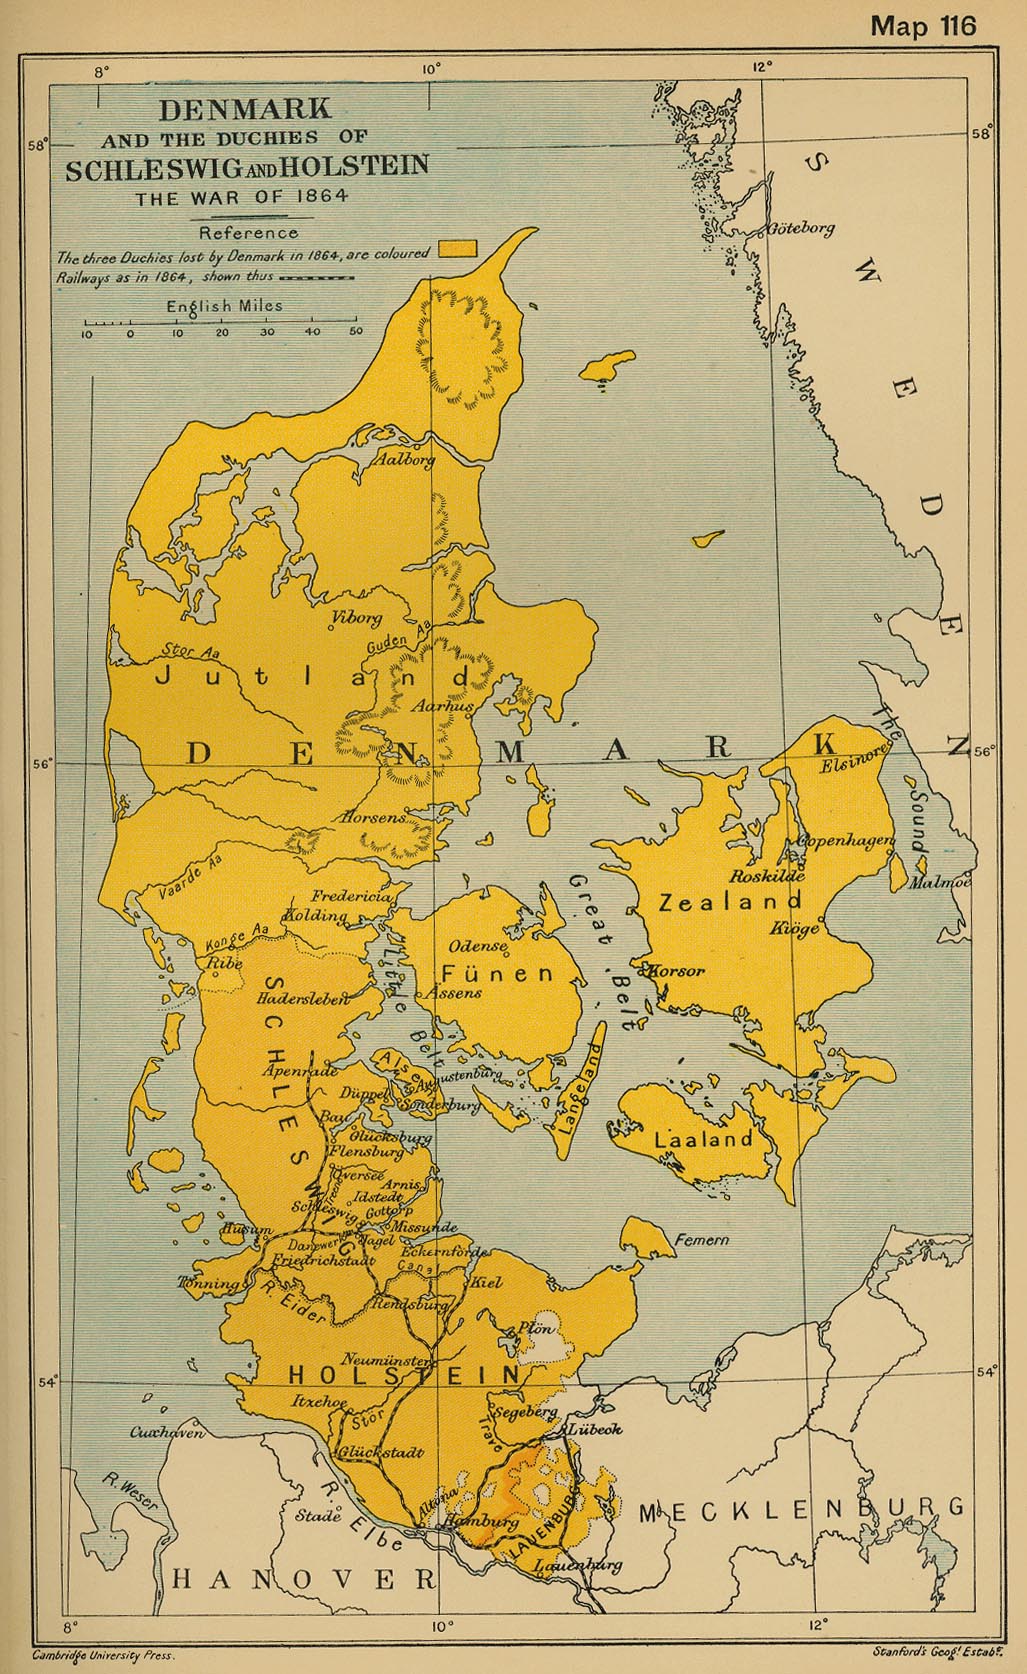 Map of Denmark and the Duchies of Schleswig and Holstein: The War of 1864 (Danish War)